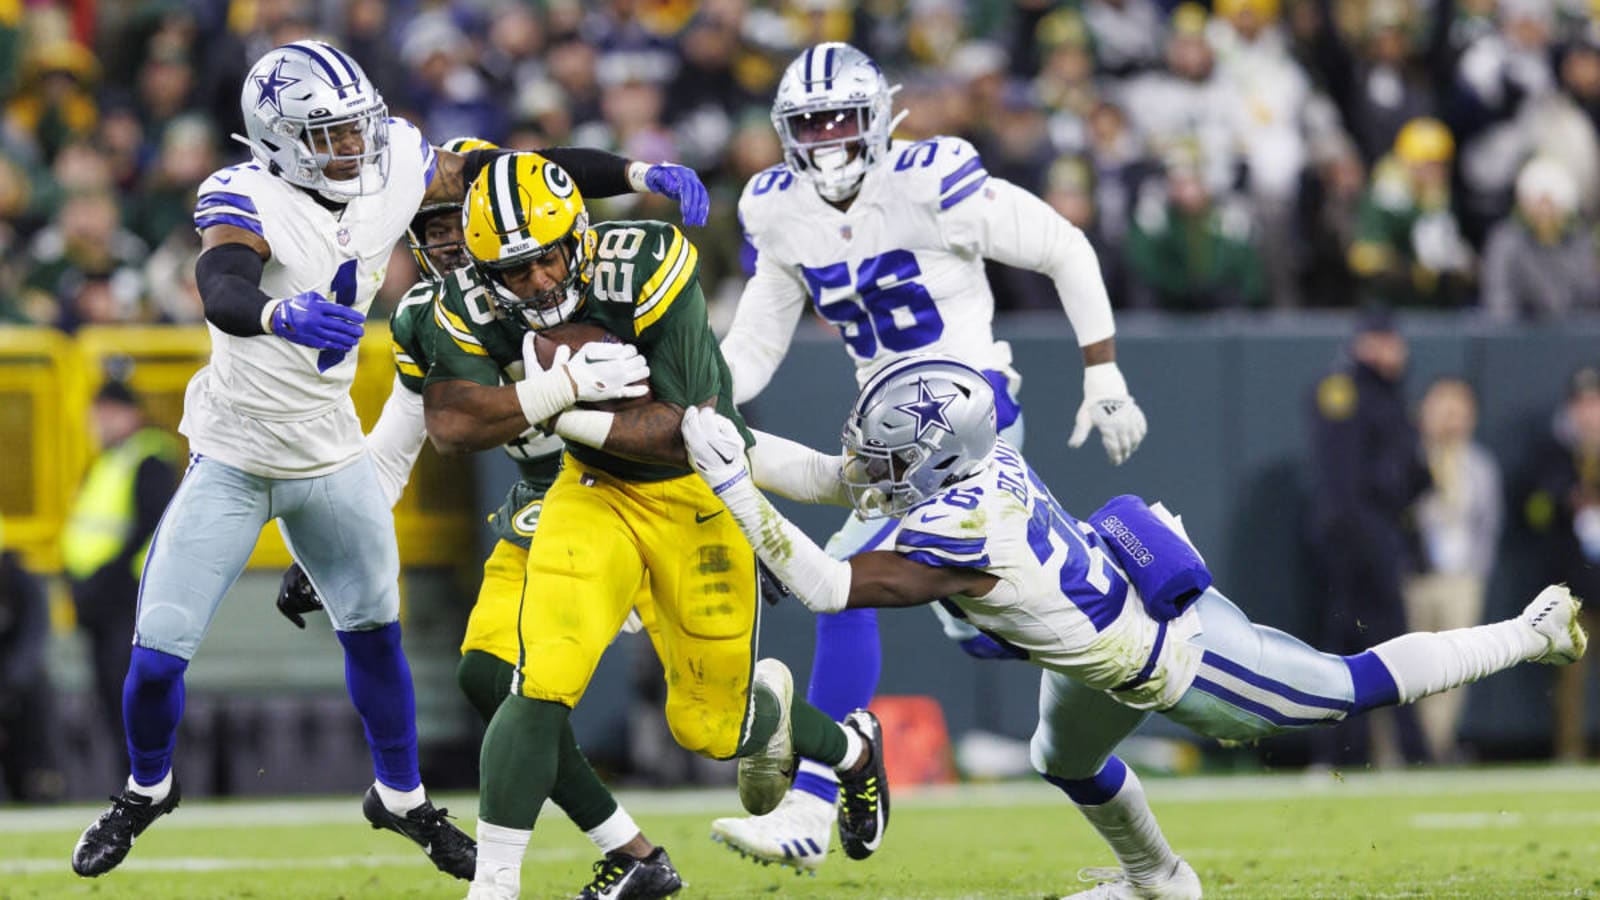 Dillon on the Cowboys? Nixon on the Lions? The perfect outside landing spot for each Packers free agent